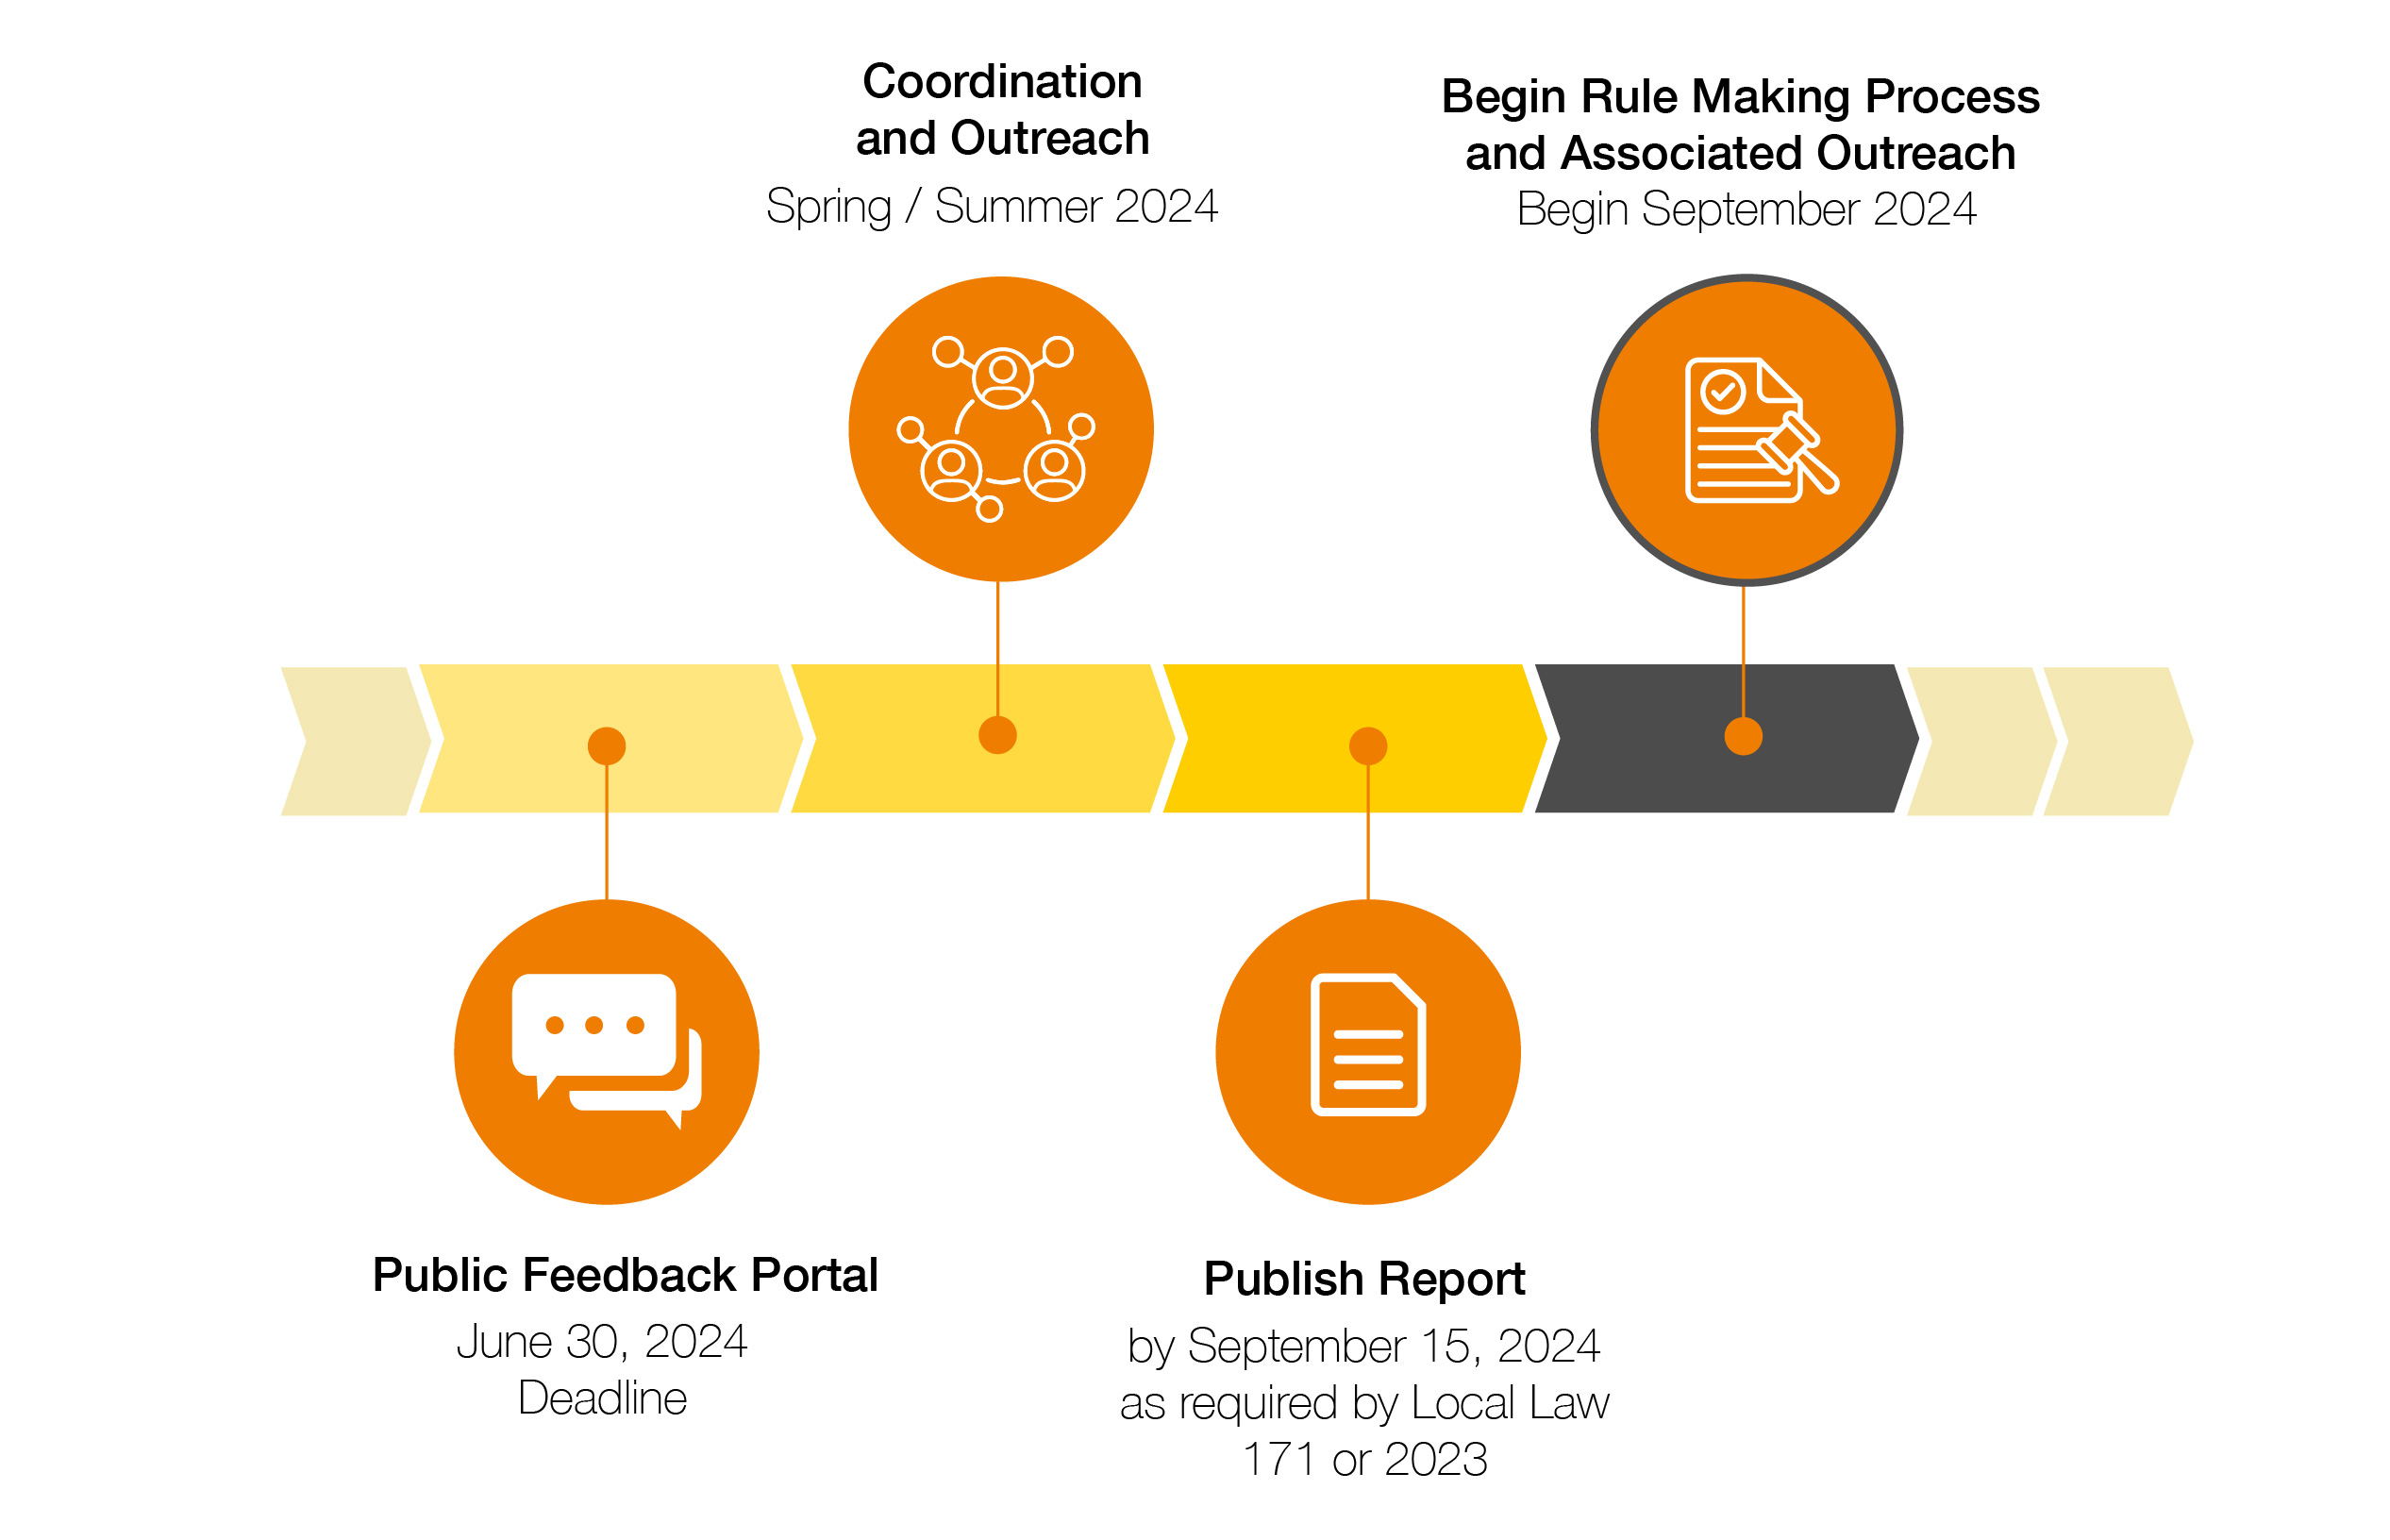 Public Feedback Portal: June 30, 2024 Deadline.  Coordination and Outreach: Spring/Summer 2024. Publish Report: September 15, 2024. Begin Rule Making Process and Associated Outreach: Begin September 2024. 